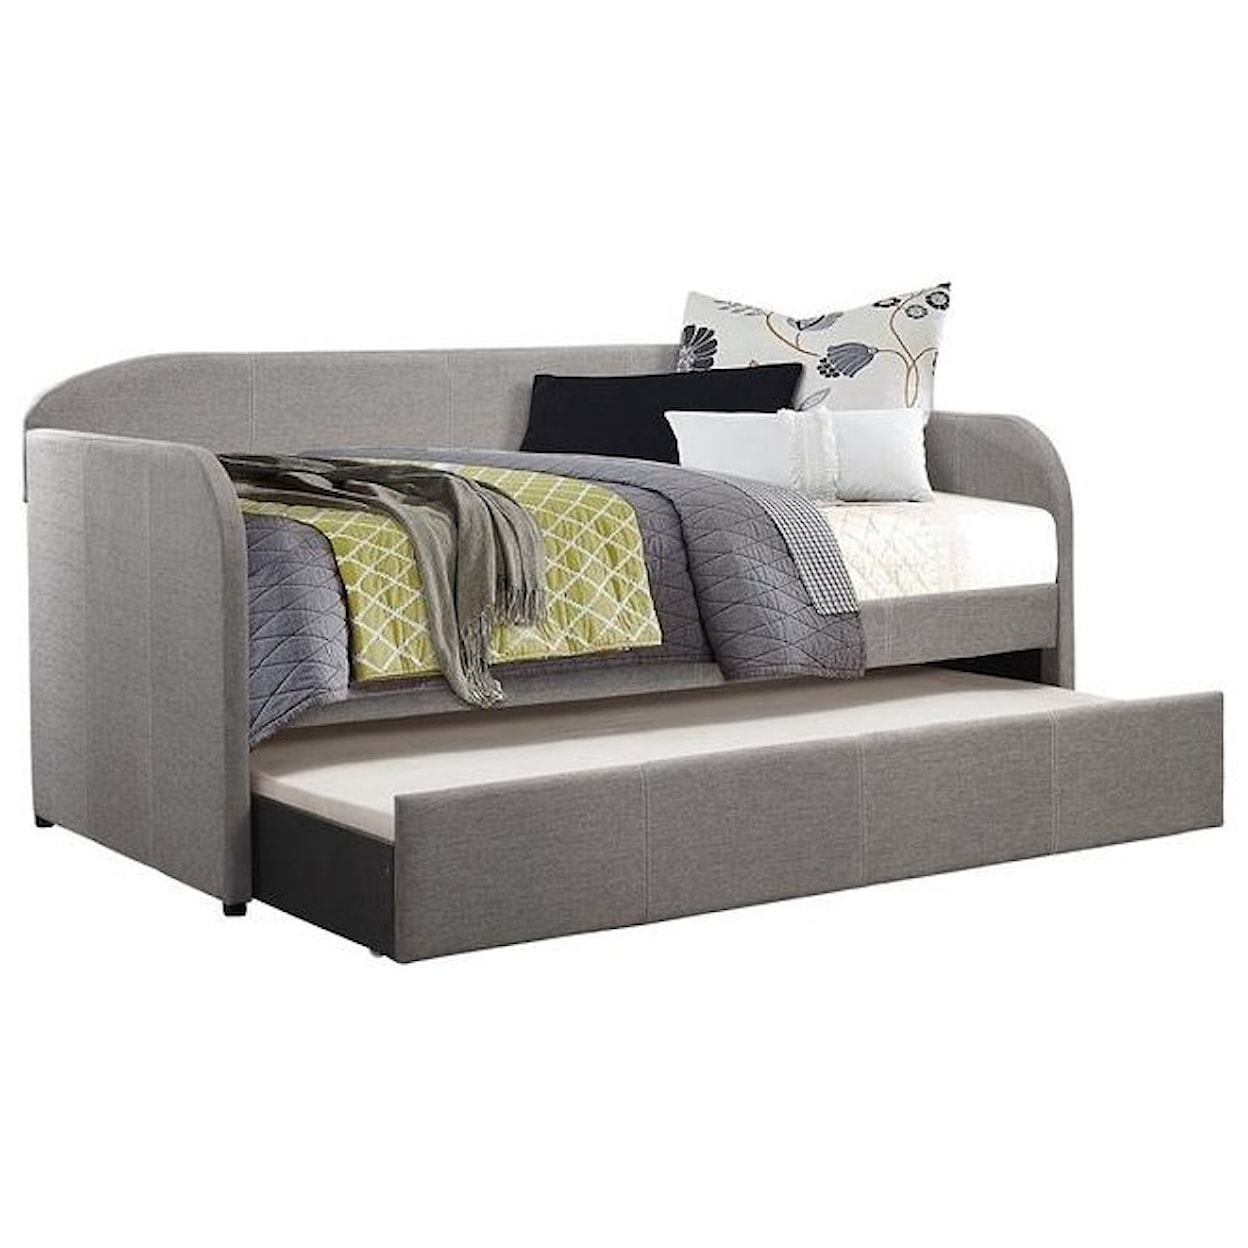 Home Style Daybeds Jenny Daybed with Trundle